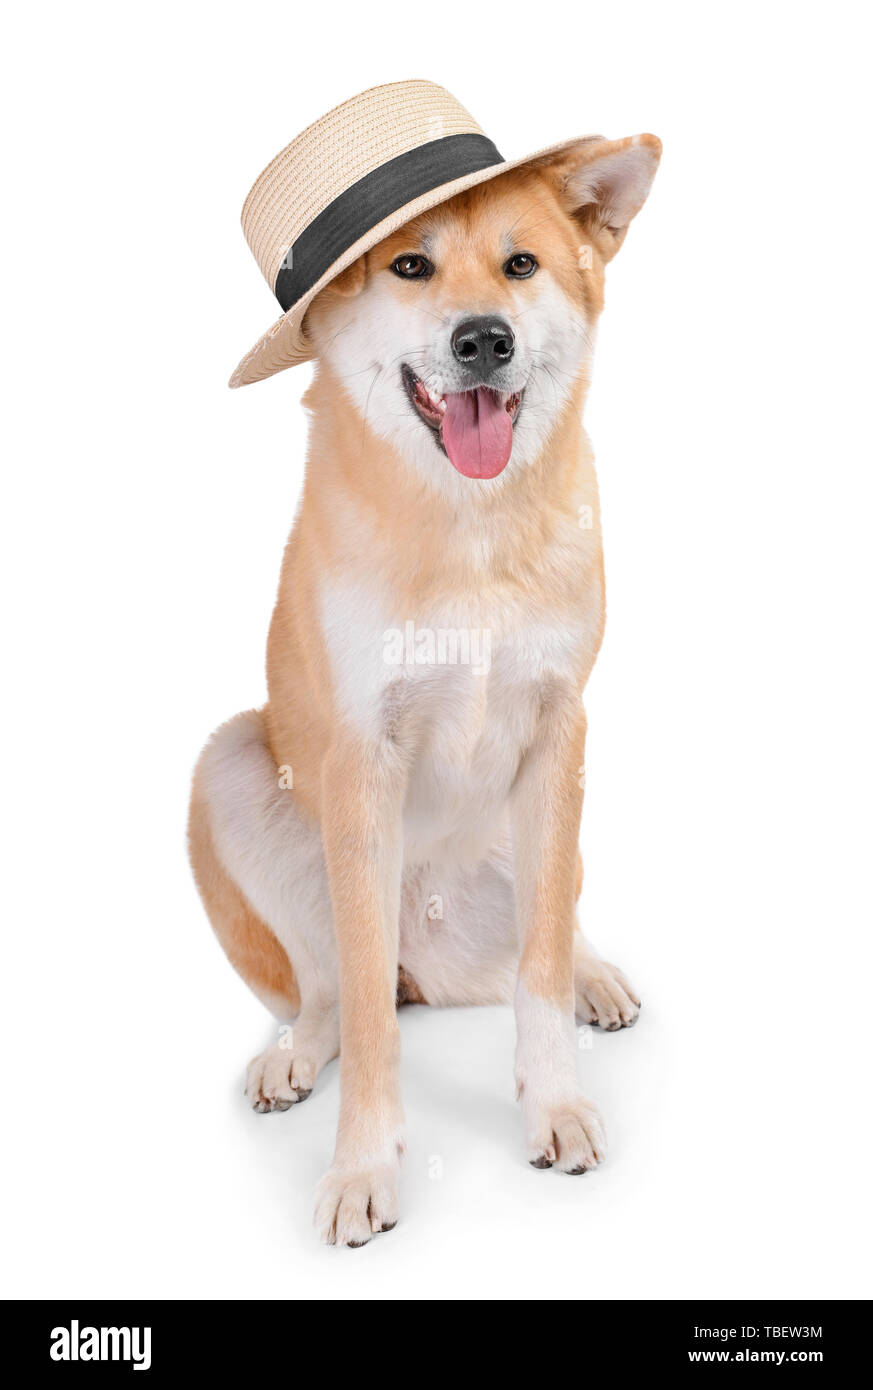 Cute Akita Inu dog in hat on white background Stock Photo